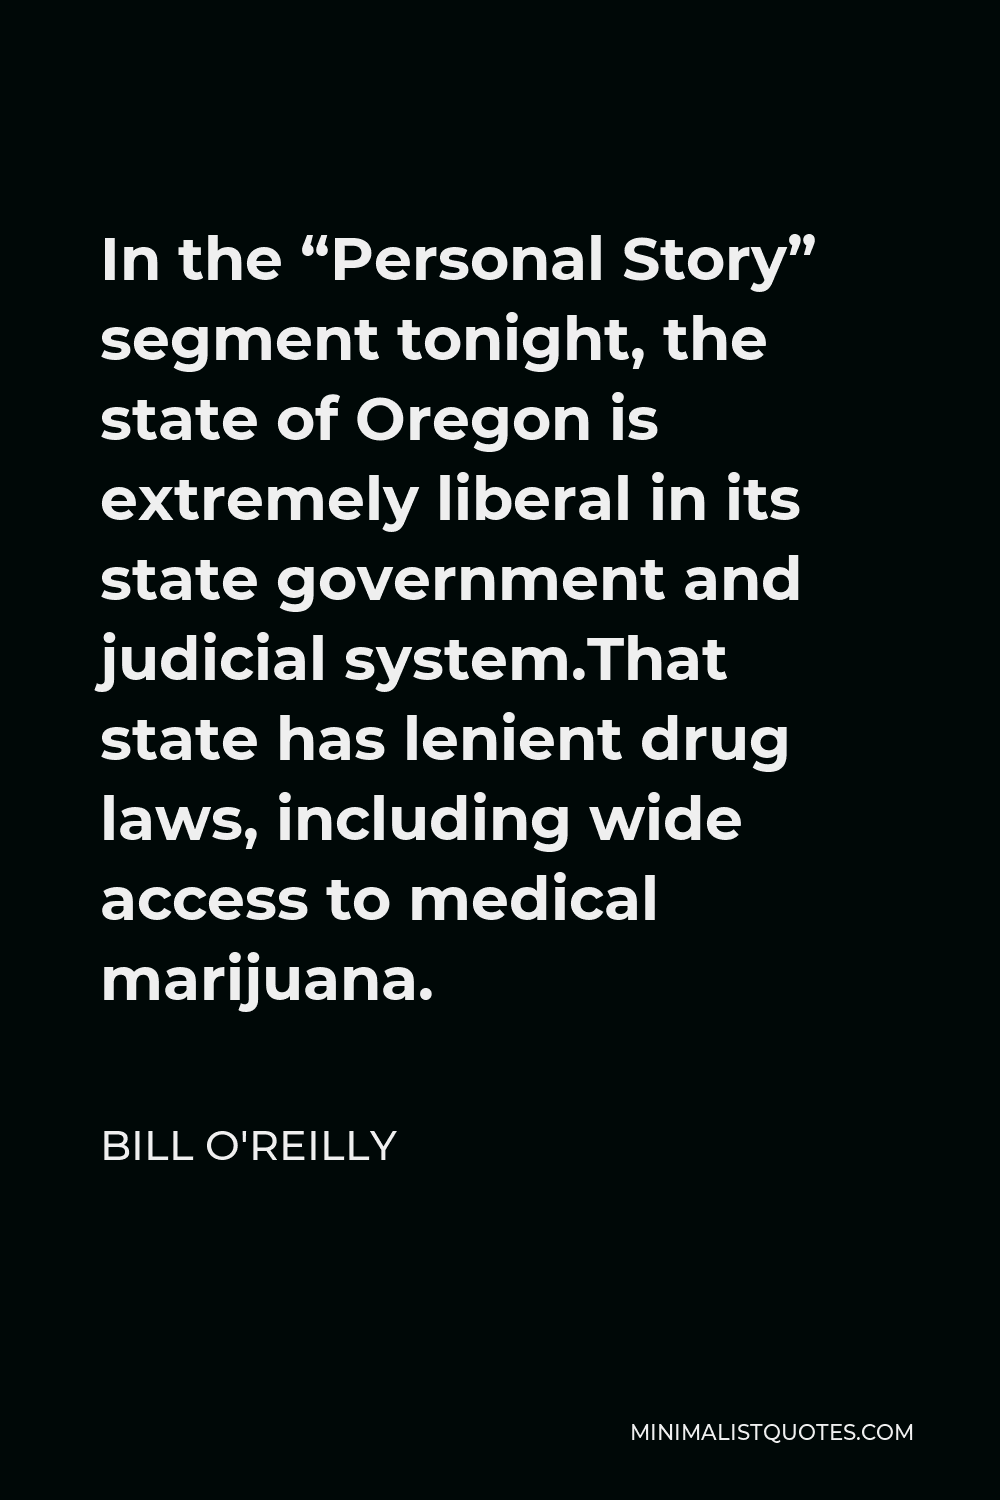 Bill O'Reilly Quote - In the “Personal Story” segment tonight, the state of Oregon is extremely liberal in its state government and judicial system.That state has lenient drug laws, including wide access to medical marijuana.